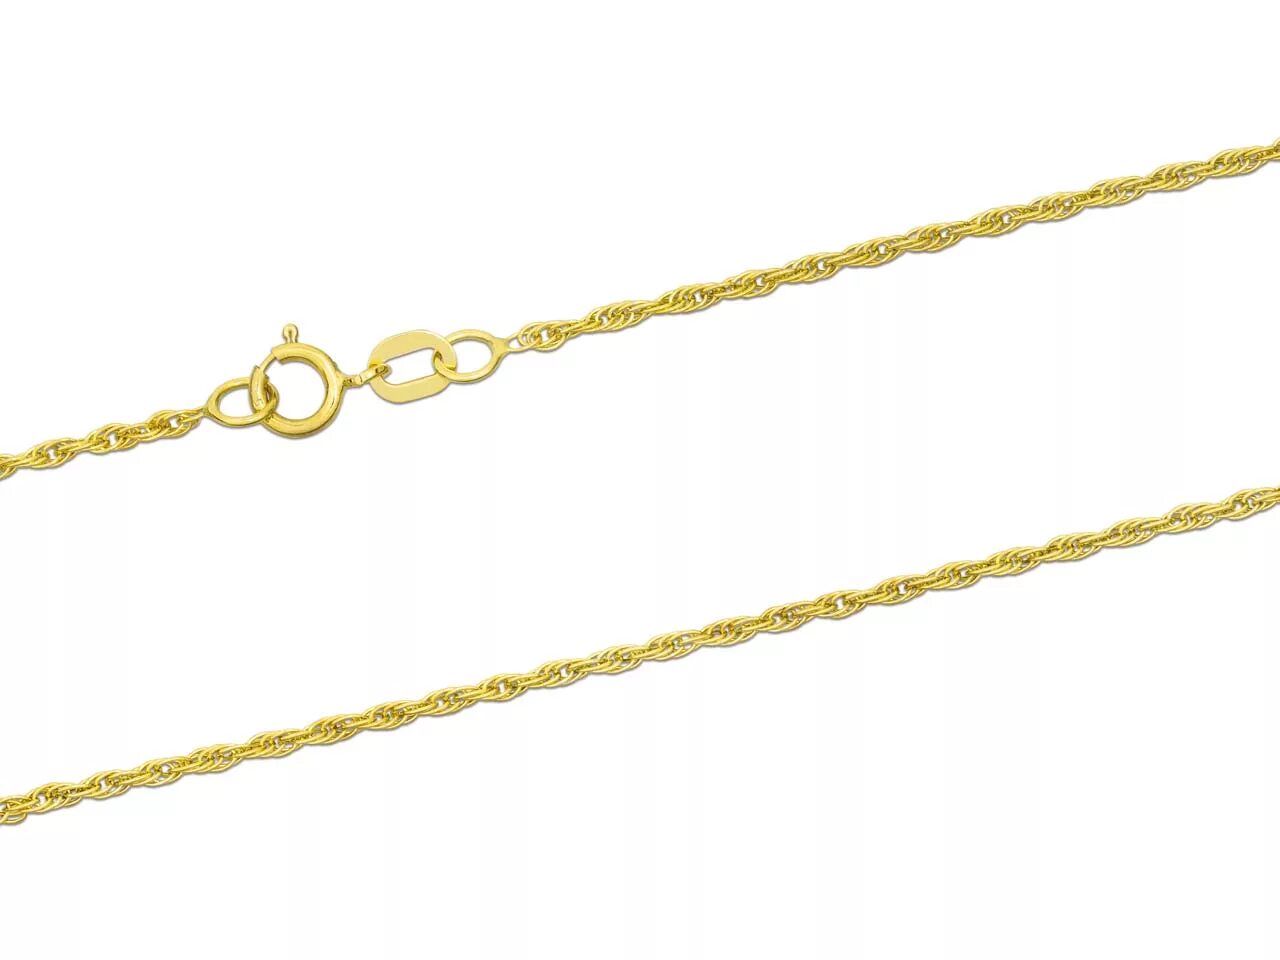 Golden Rope. 20 Inch Gold Rope Chain. Golden Rope PNG.